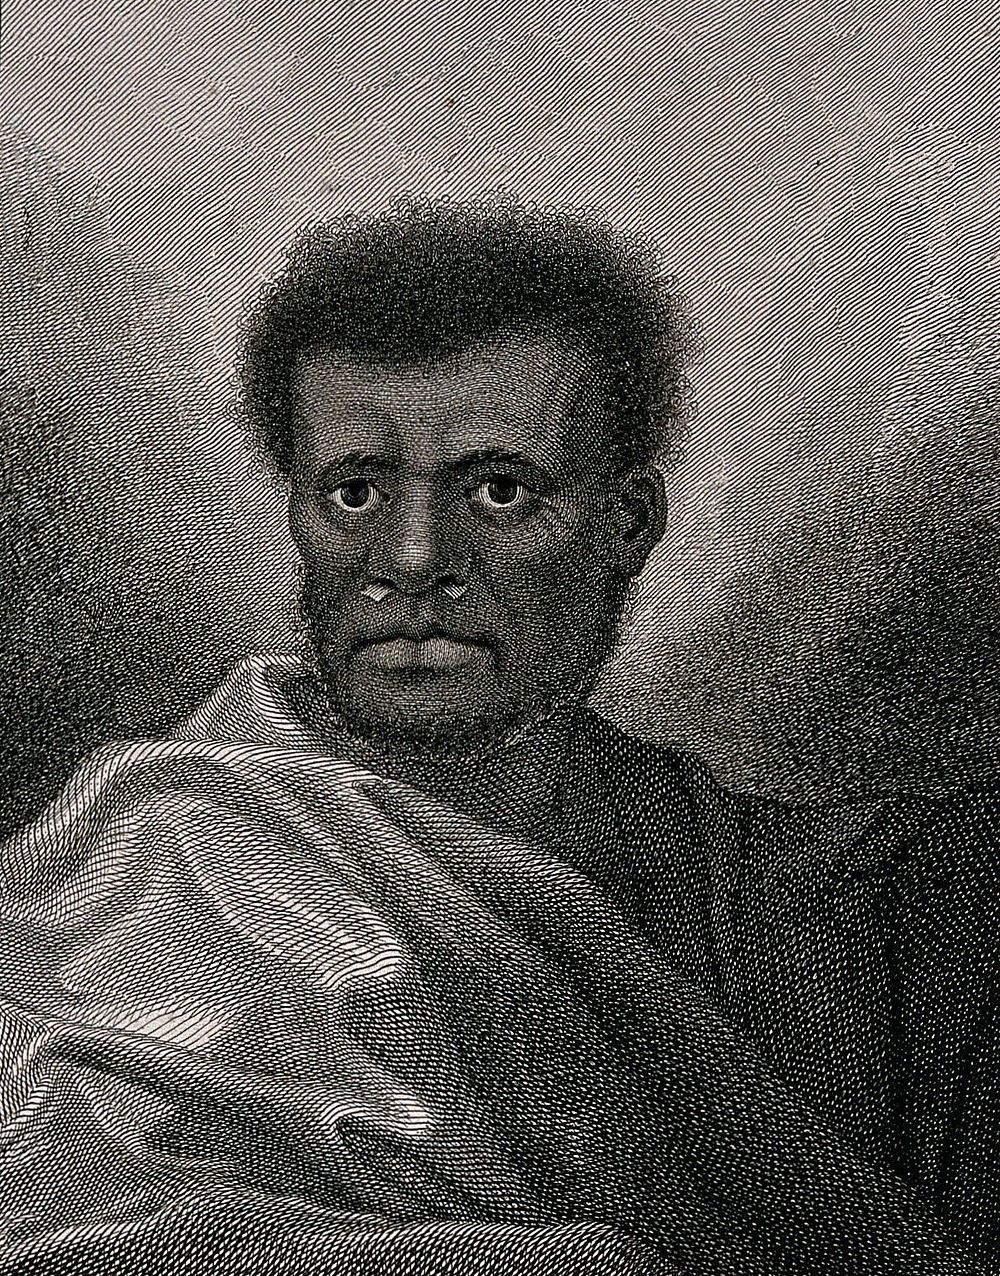 A man from Malakula Island, Vanuatu, encountered by Captain Cook on his second voyage, 1772-1775. Engraving by J. Caldwall…